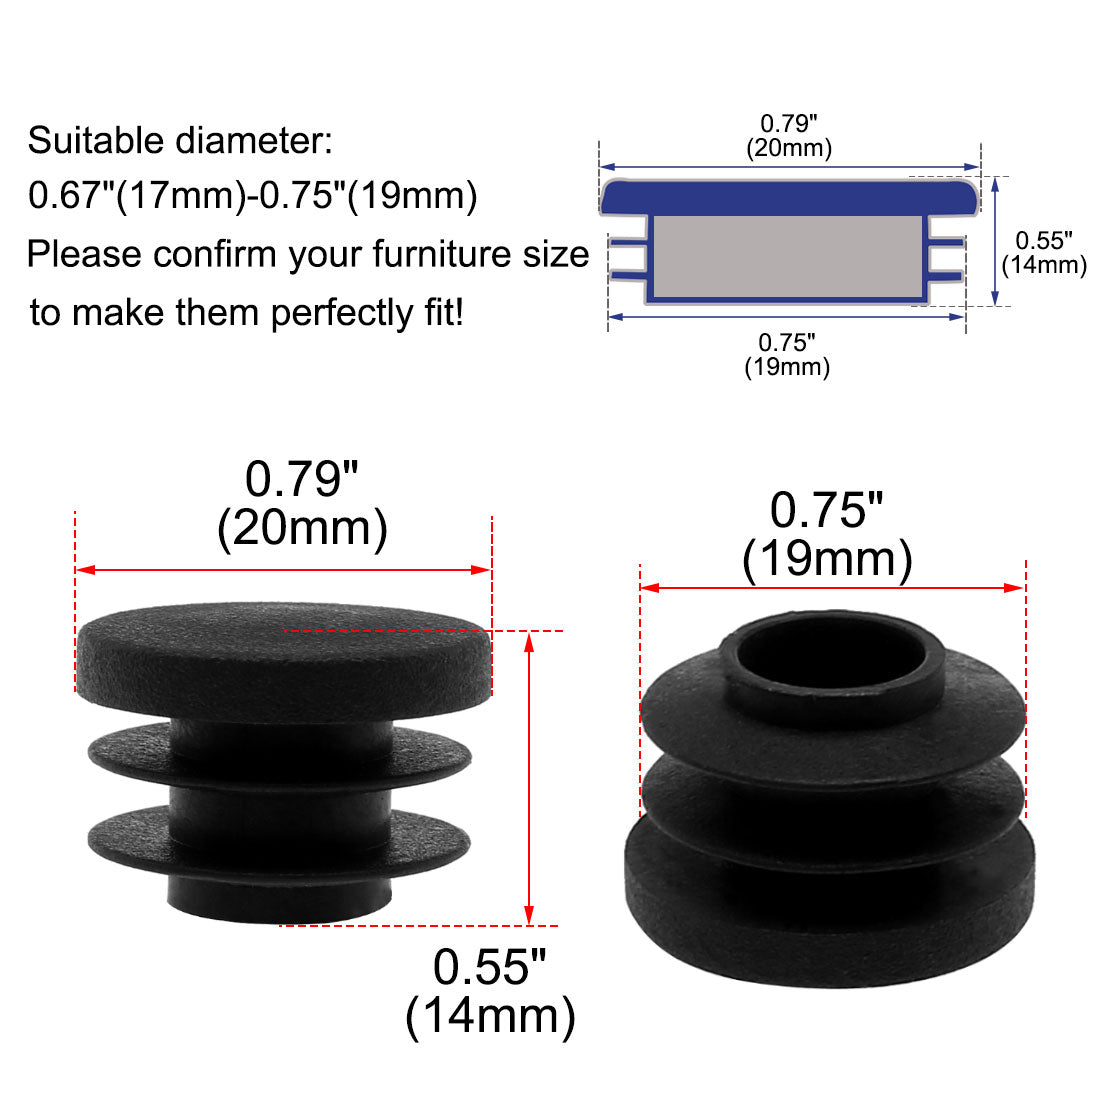 Uxcell Uxcell 3/4" 20mm OD Plastic Round Tube Ribbed Inserts End Cover Caps 70pcs, 0.67"-0.75" Inner Dia, Floor Furniture Chair Cabinet Protector